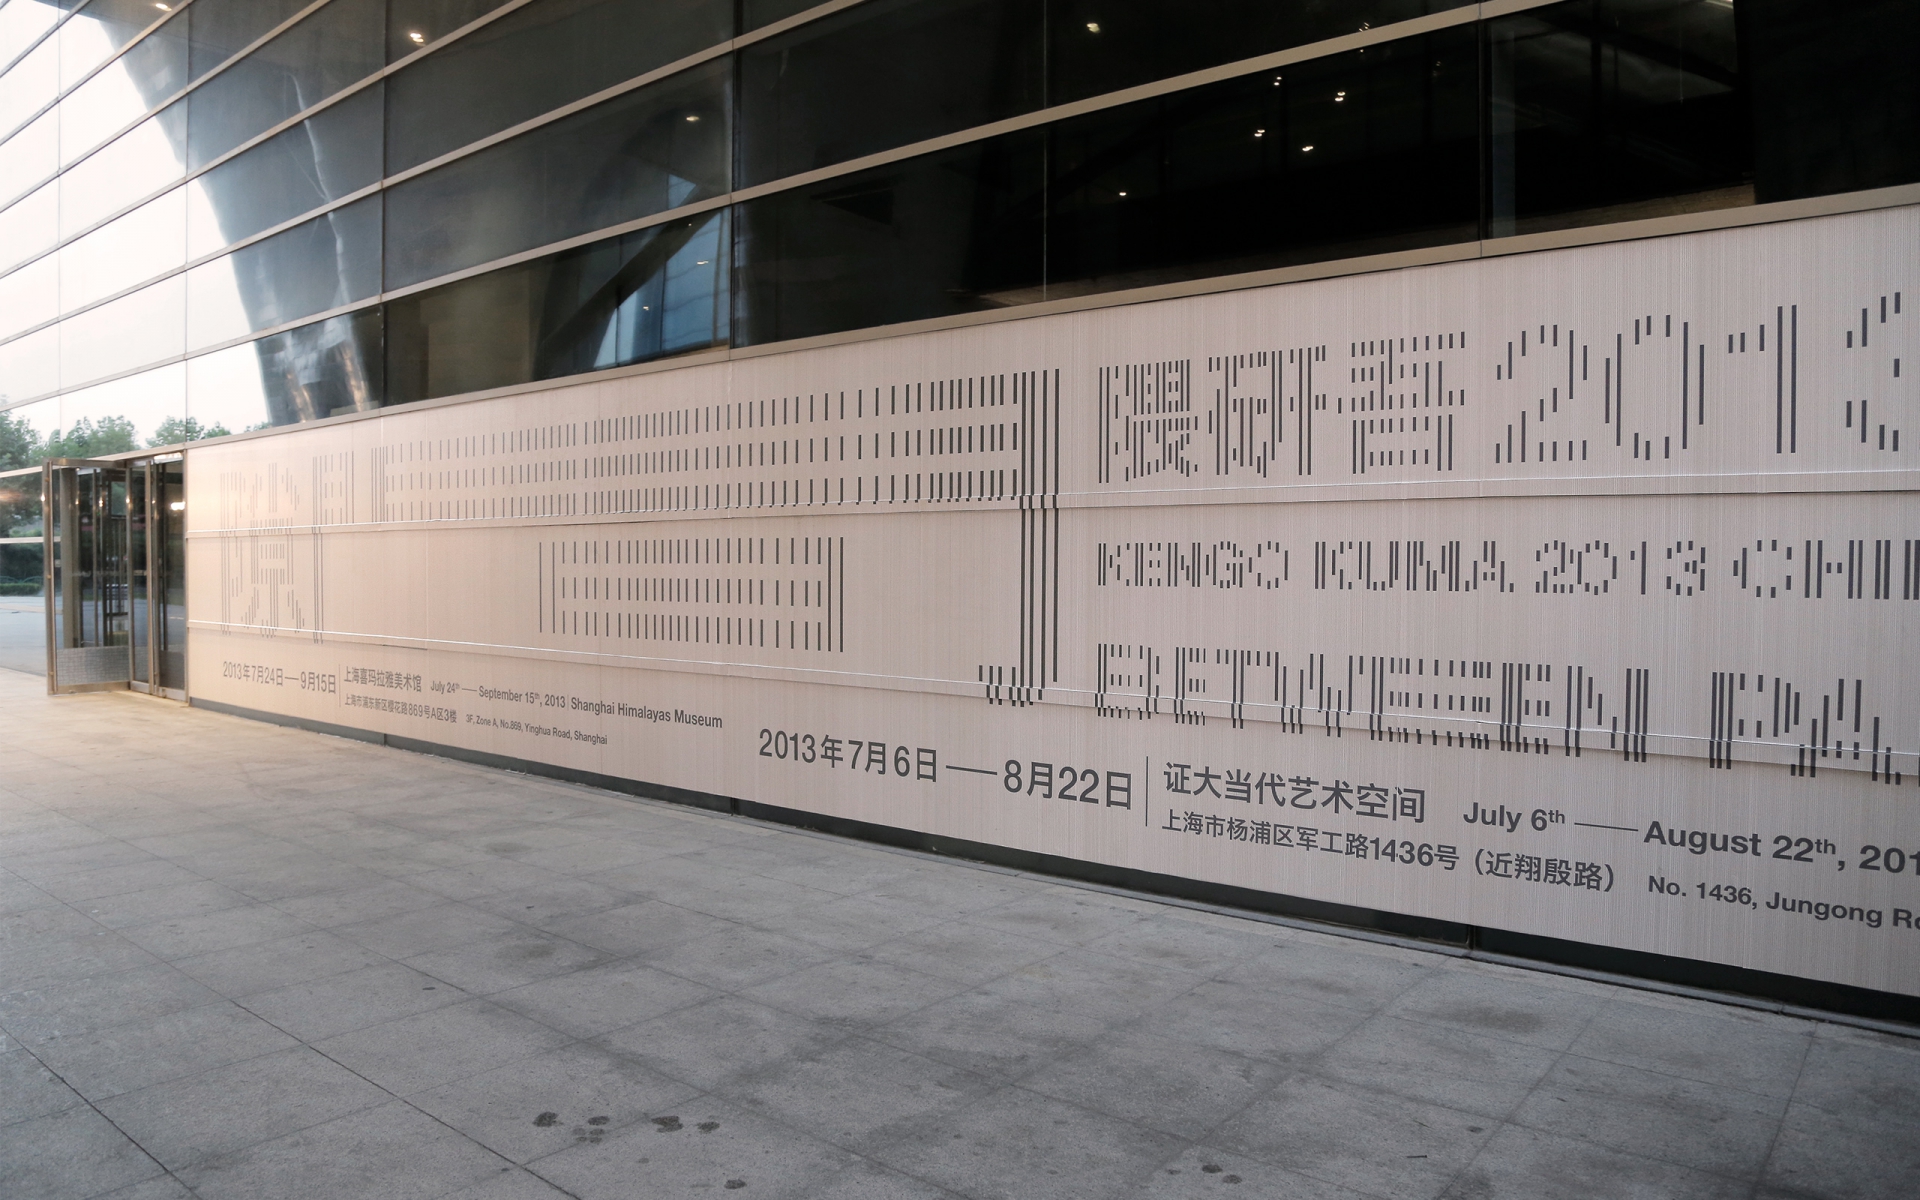 Kengo Kuma Exhibition 2013 in China “BETWEEN PARTICLES”